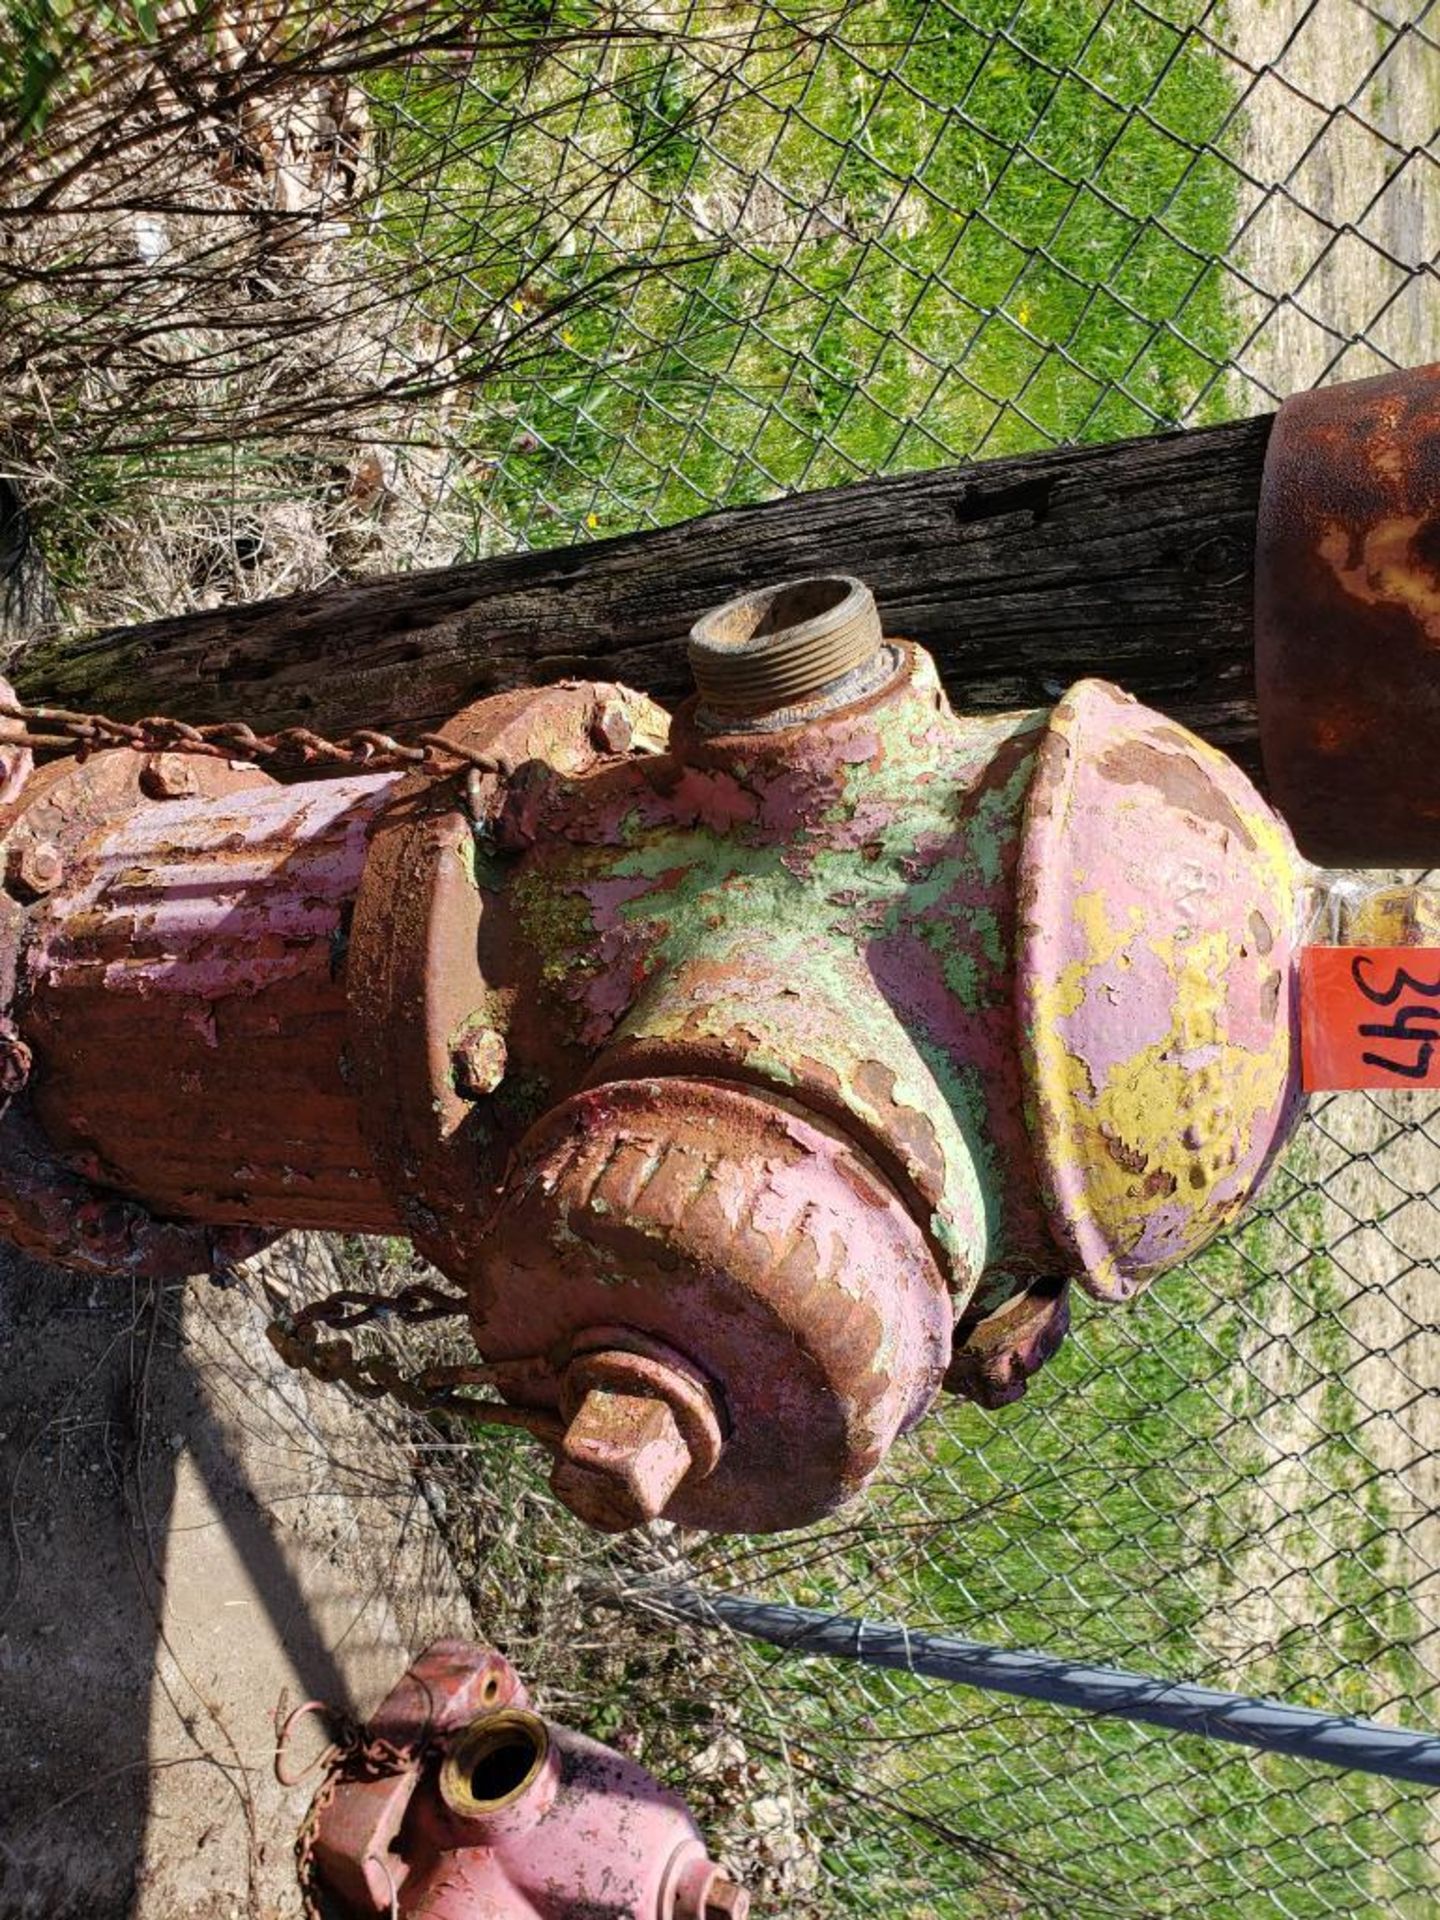 Fire hydrant. - Image 5 of 5